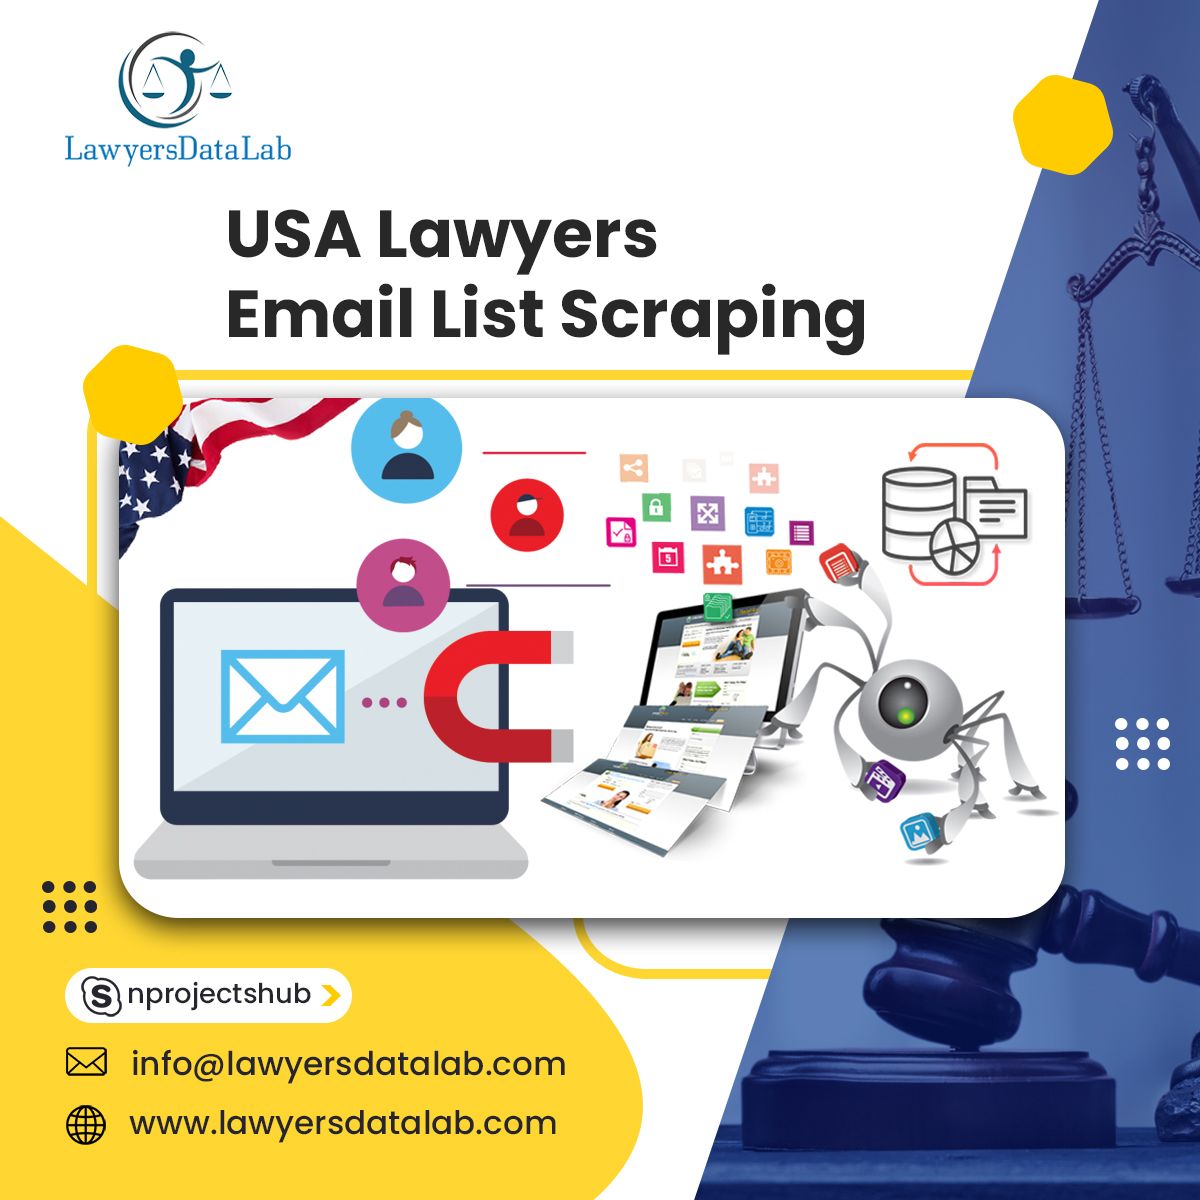 Email List of Lawyers in Kansas Email us: info@lawyersdatalab.com lawyersdatalab.com/usa-attorneys-… #emaillistoflawyersinkansas #kansasattorneysmailingdatabase #lawyersemaillist #lawyersdatascrapingservices #lawyersdatabase #attorneysdatabase #attorneysemaillist #attorneymailinglist